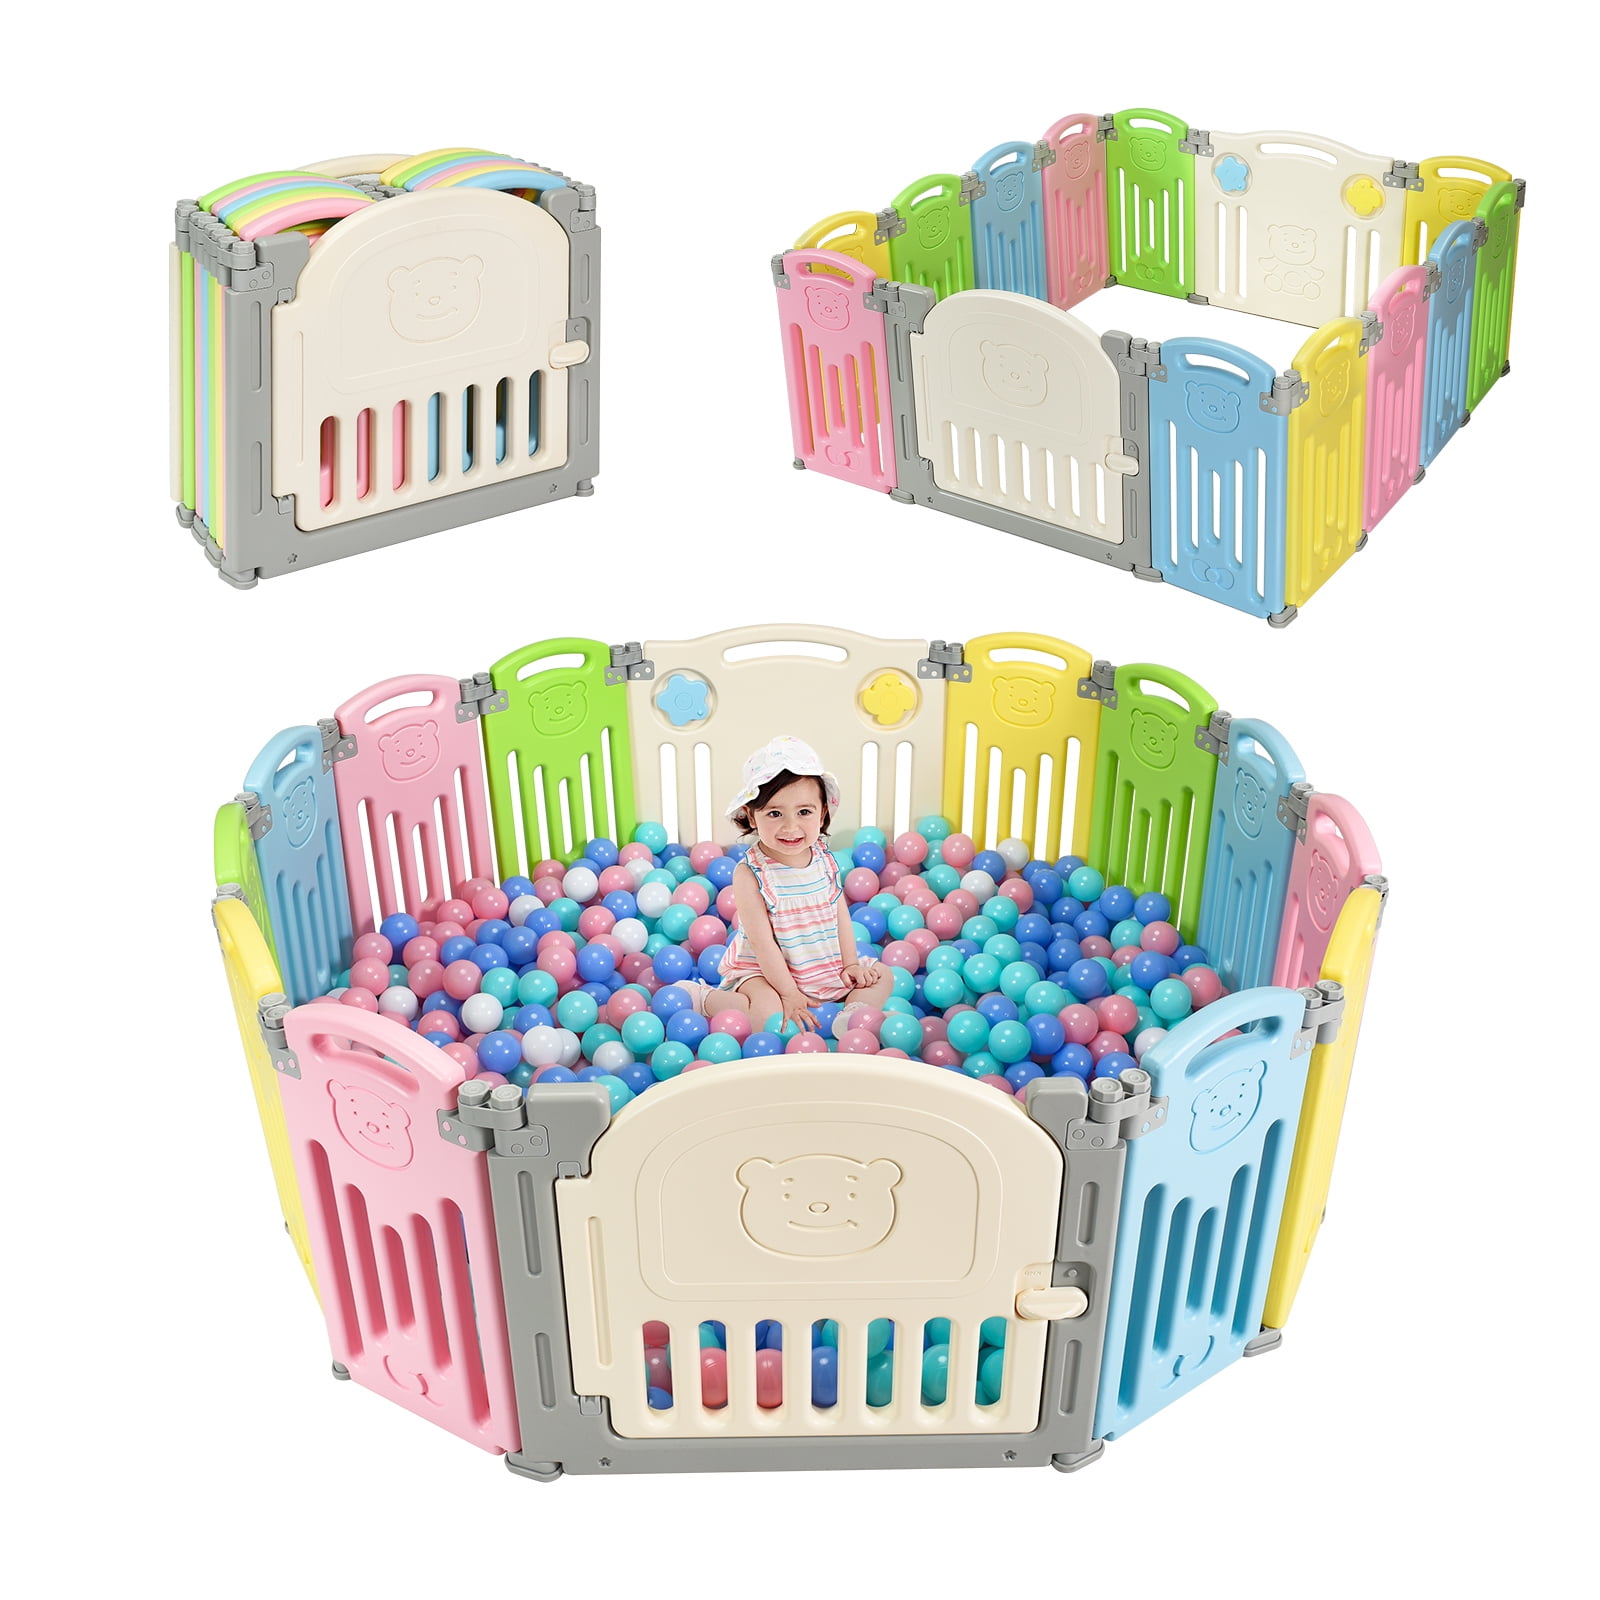 Green & Pin Safety Lock Rxakudedo Foldable Baby playpen 12-Panel Kids Safety Activity Center Playard Adjustable Shape BPA-Free w/Non-Slip Foot Mats & Card Buckles HDPE Portable Folding for Home Indoor Outdoor Infant & Toddler Fence 55.1L×41.3W×24.8H